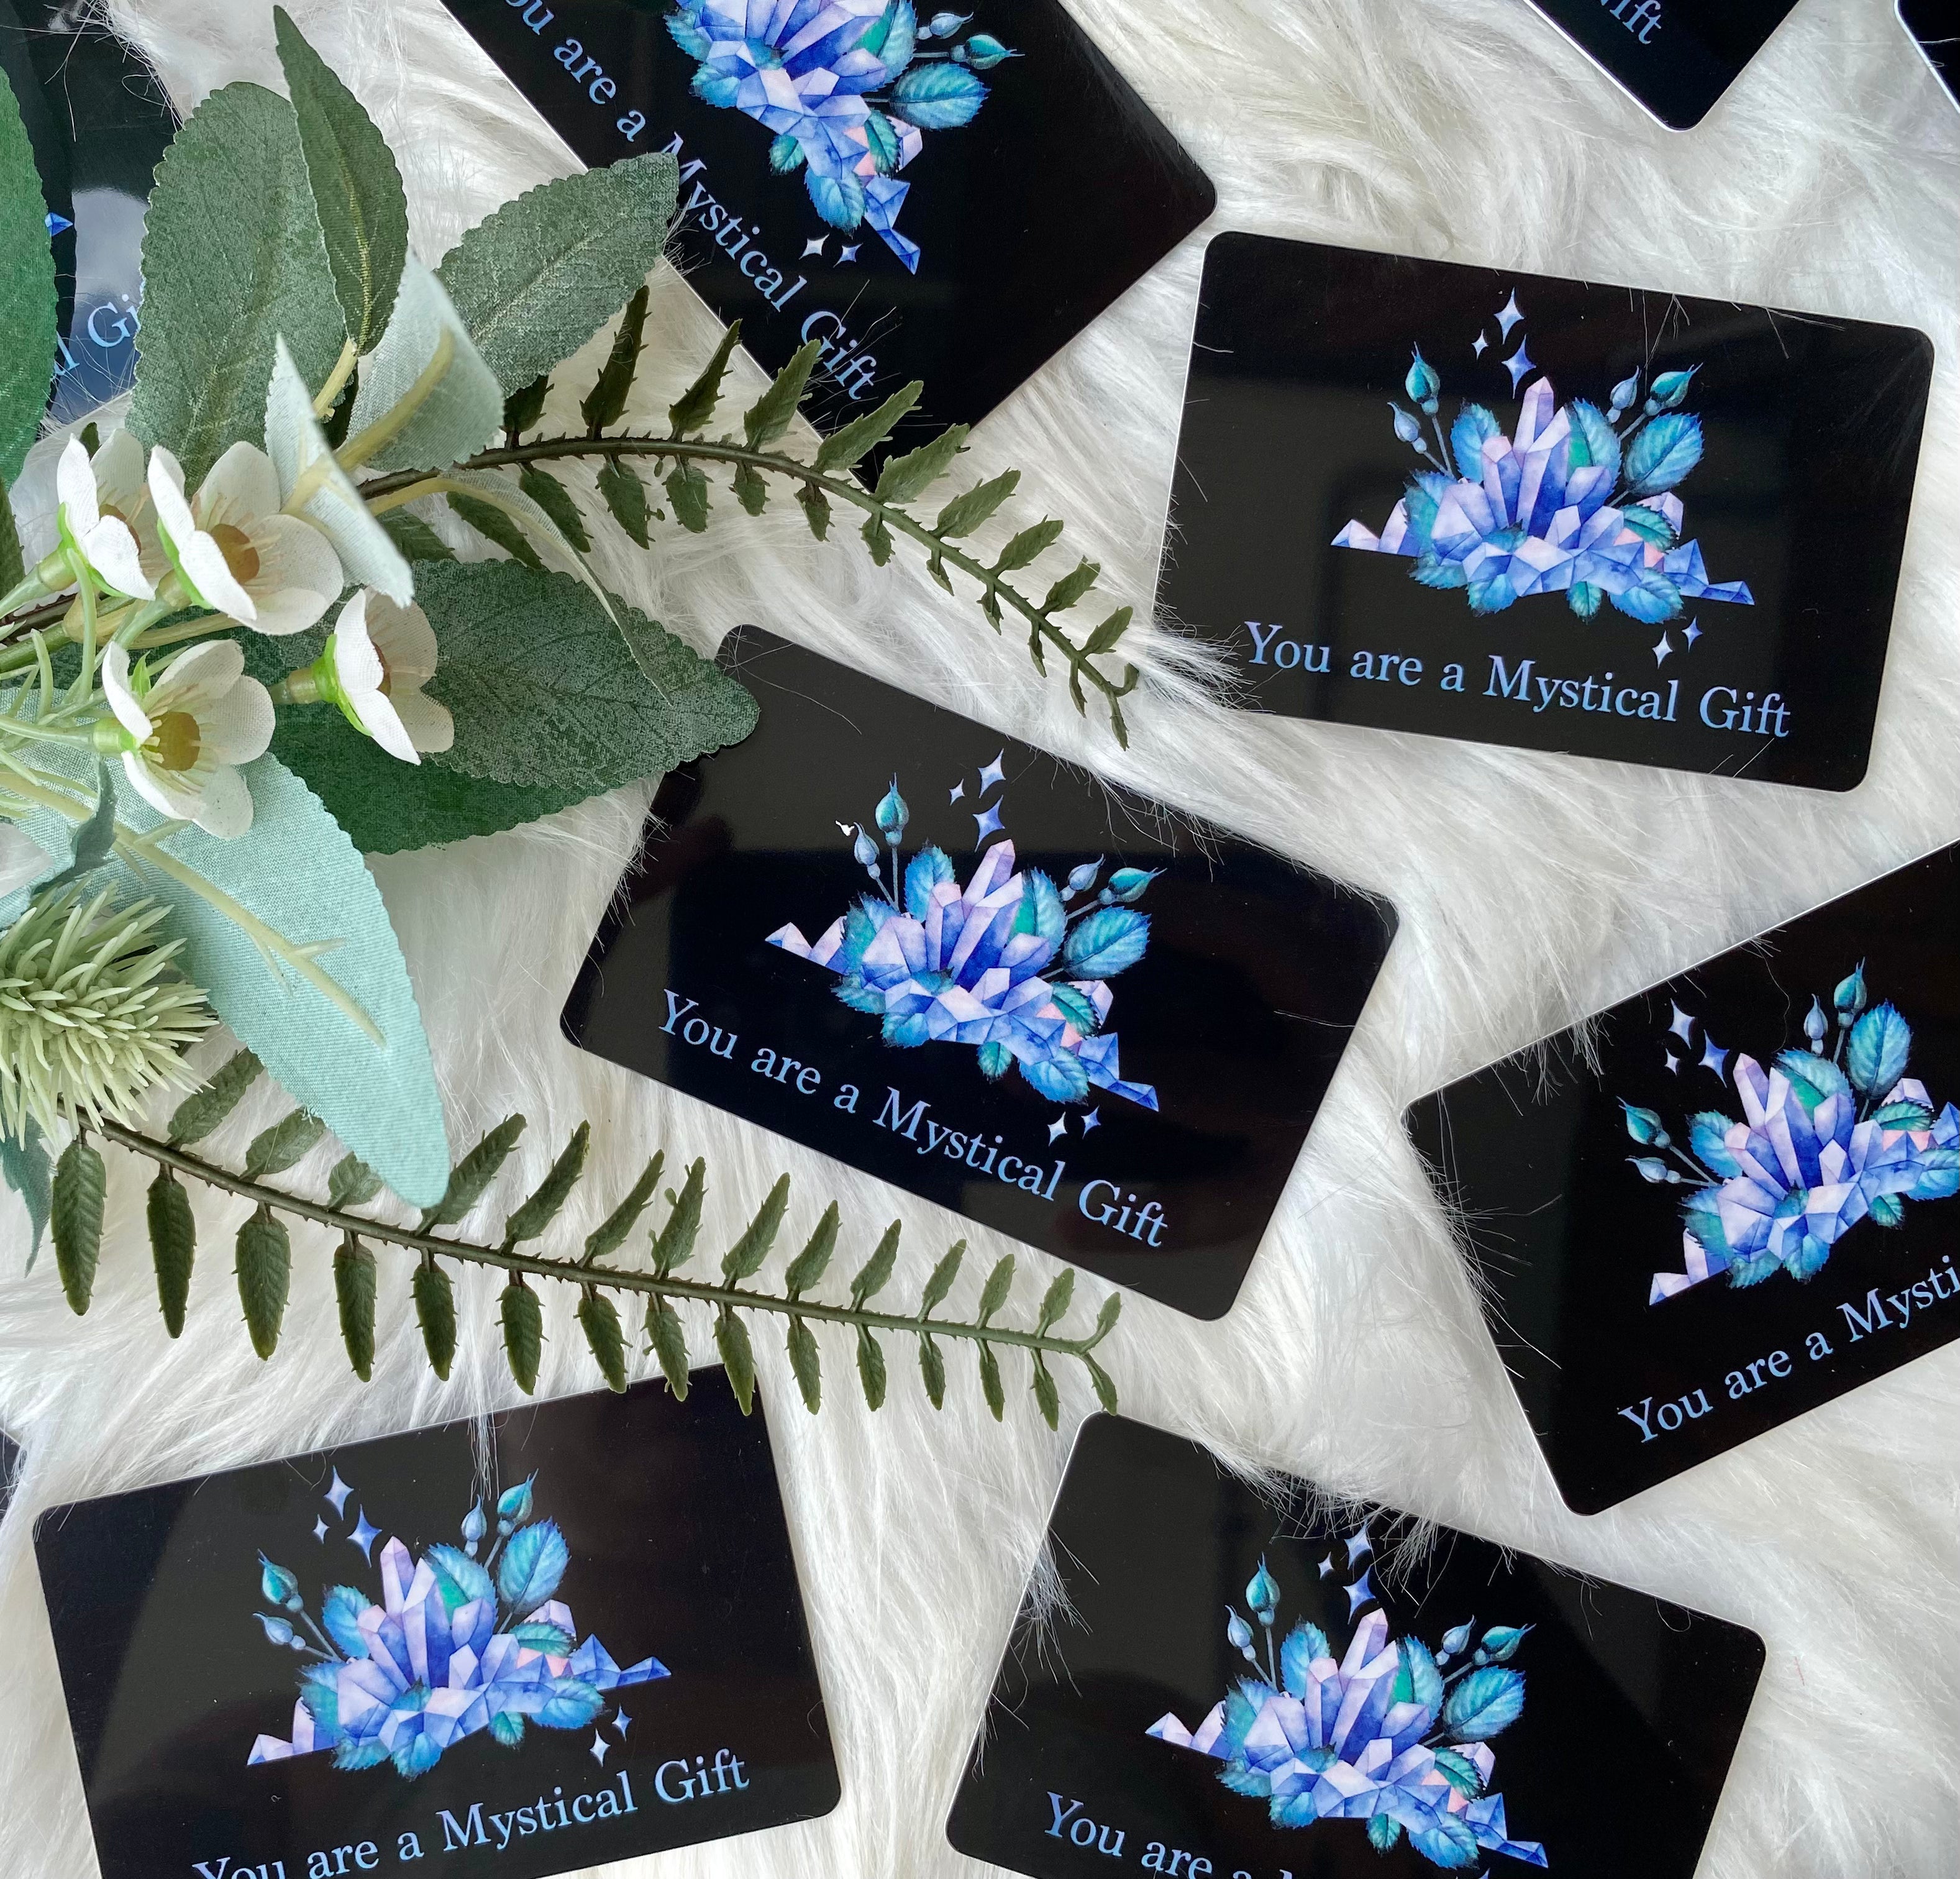 Gift Vouchers - Muse Crystals & Mystical Gifts